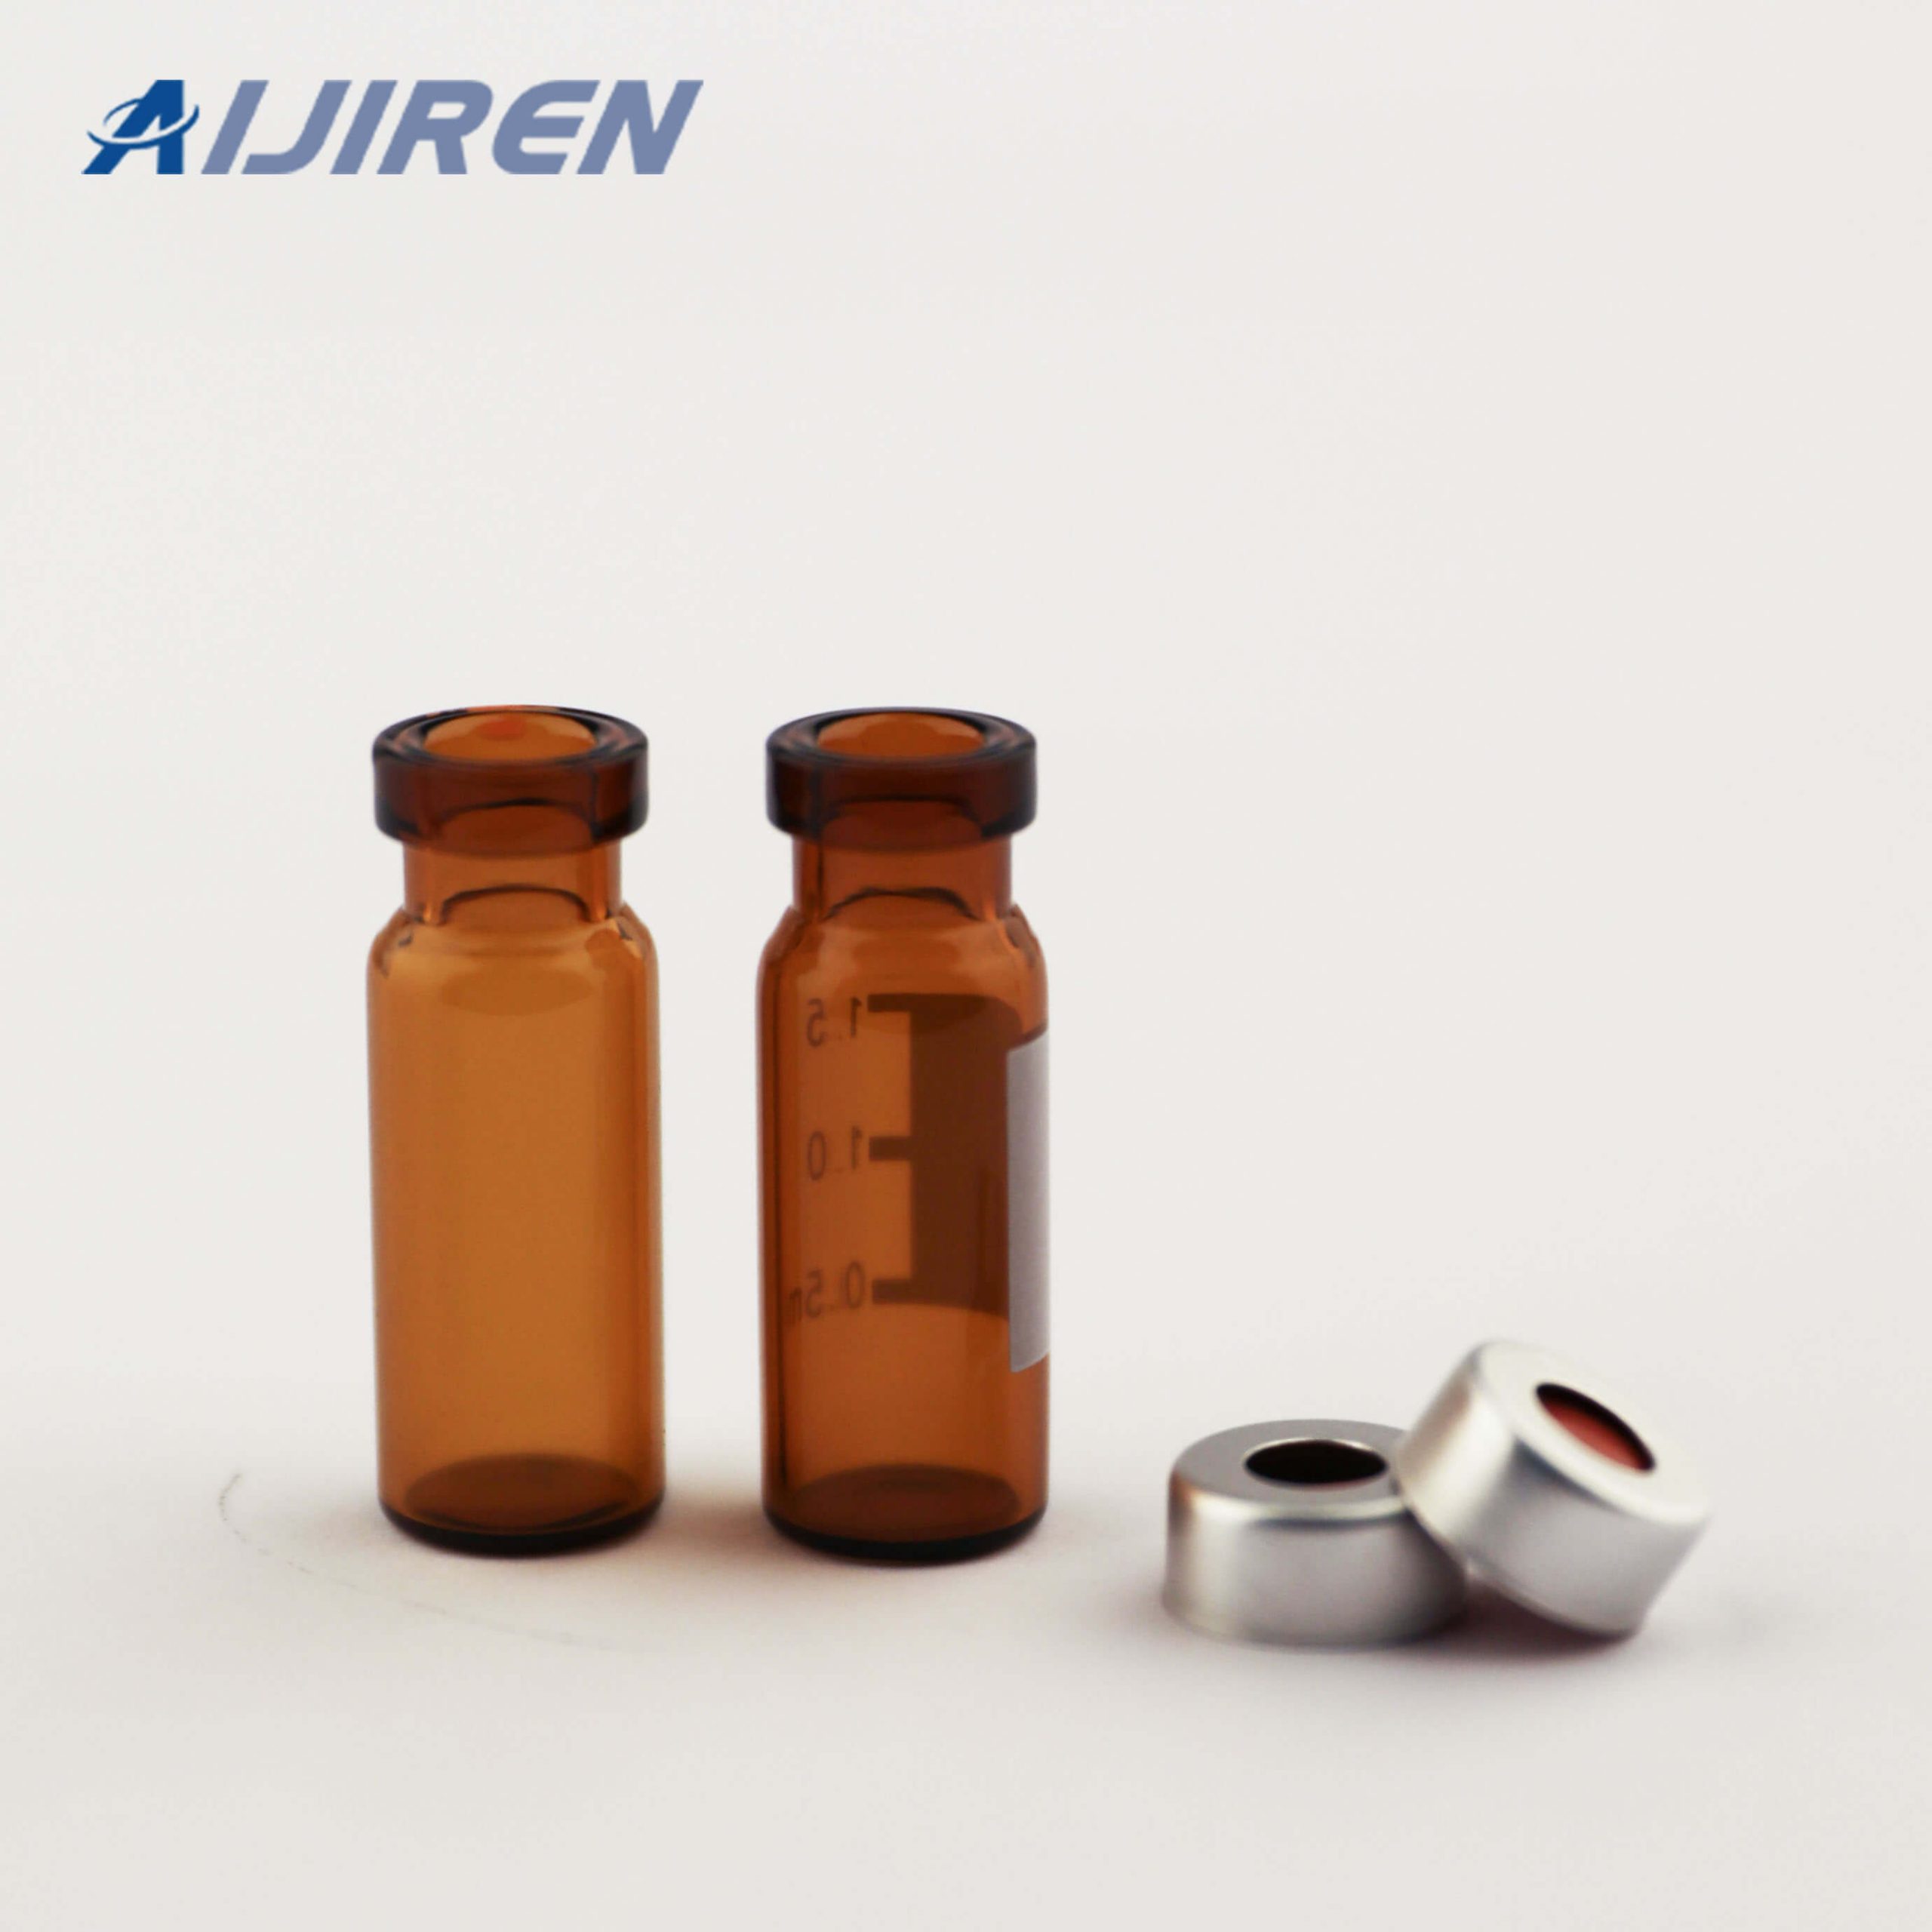 20ml headspace vial2ml Amber Glass Crimp Vials for WATERS